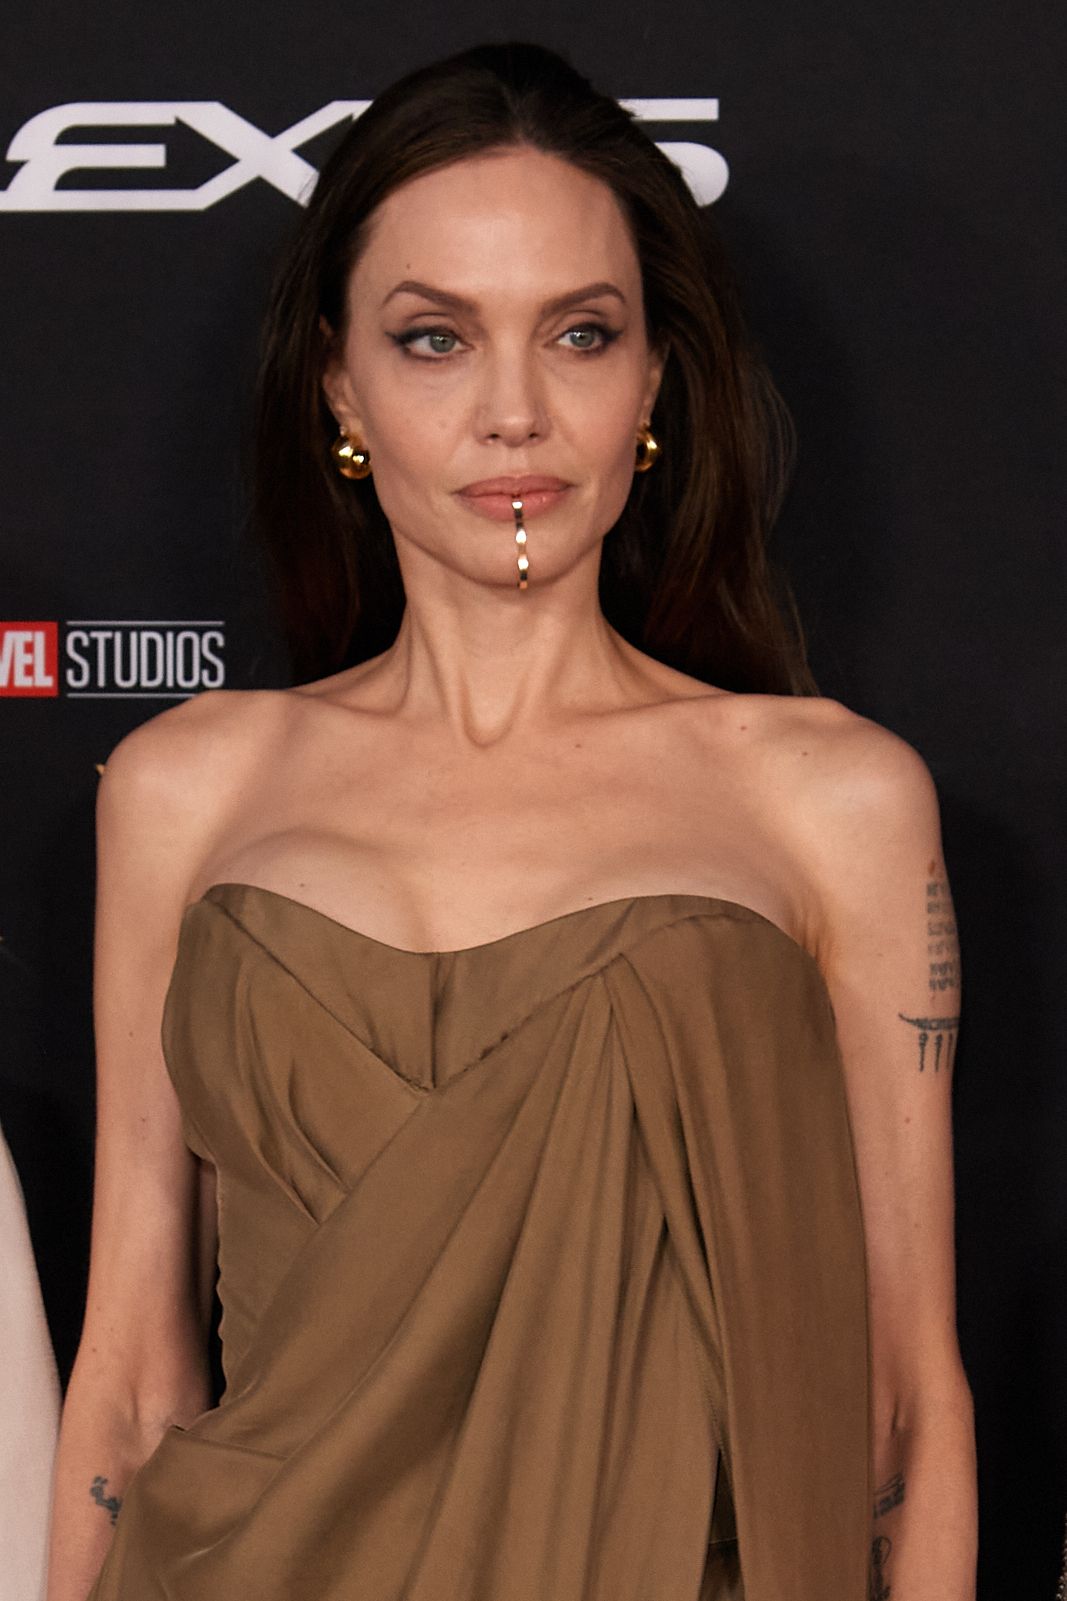 Angelina Jolie Slips on Pumps and Keeps It Classy in Black Midi